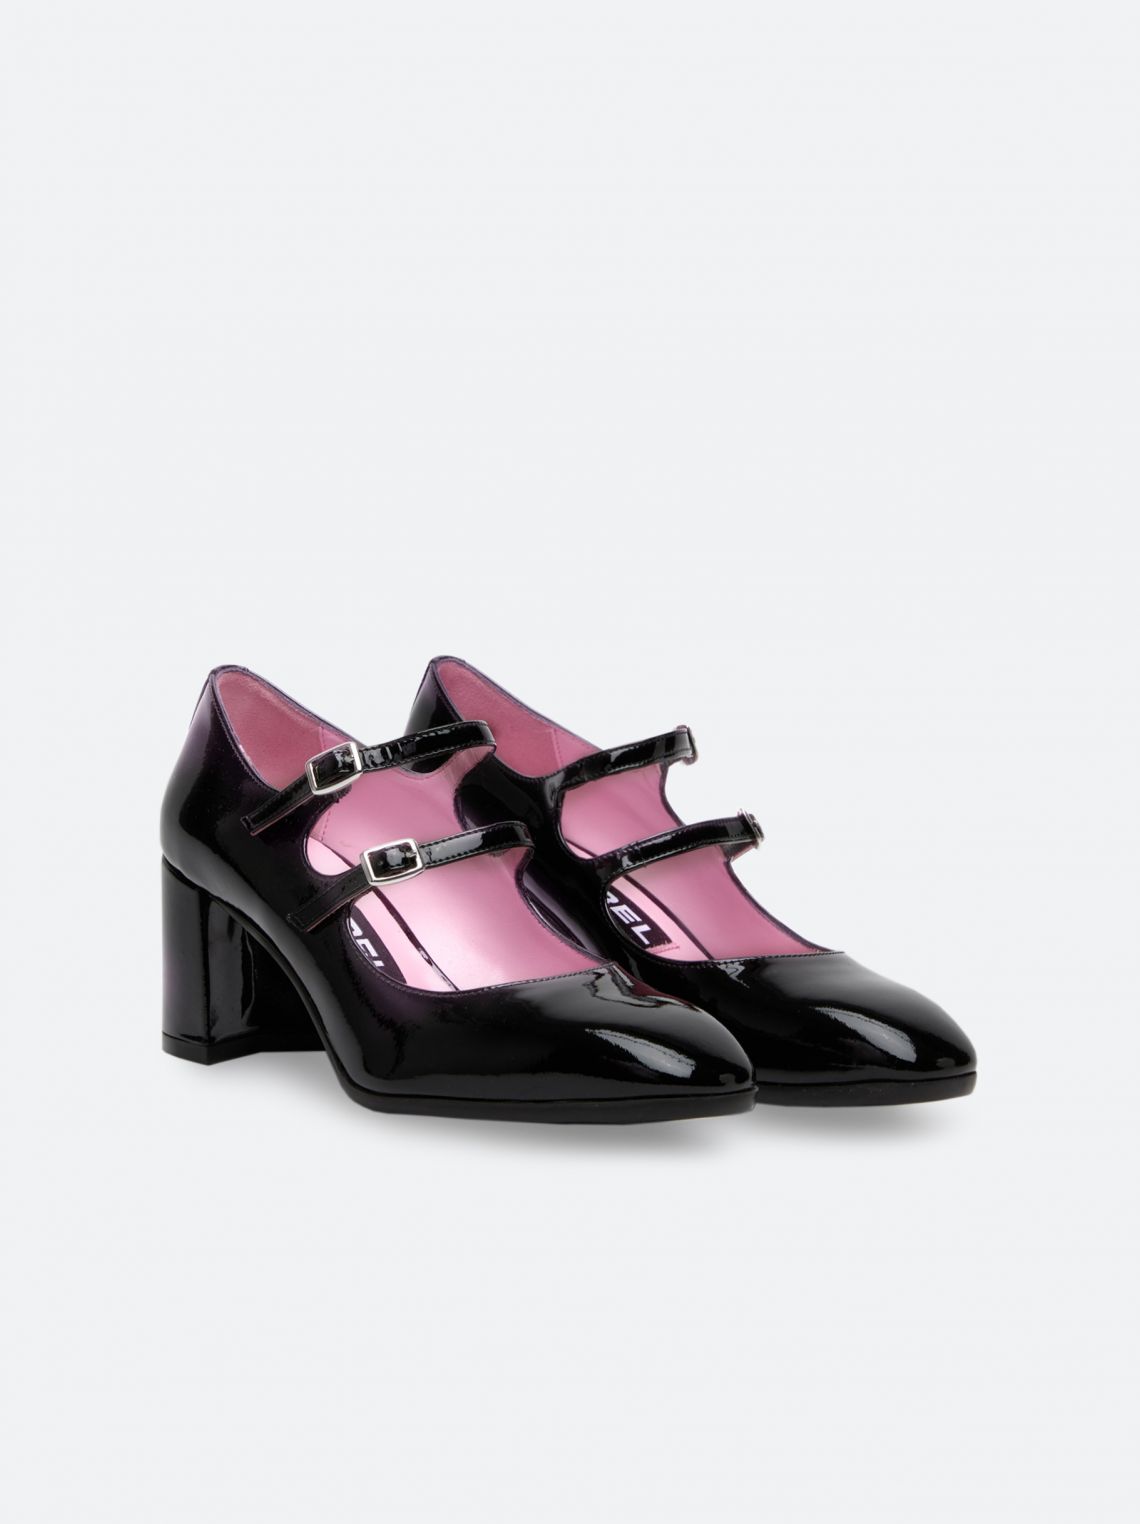 ALICE red patent leather Mary Janes | Carel Paris Shoes